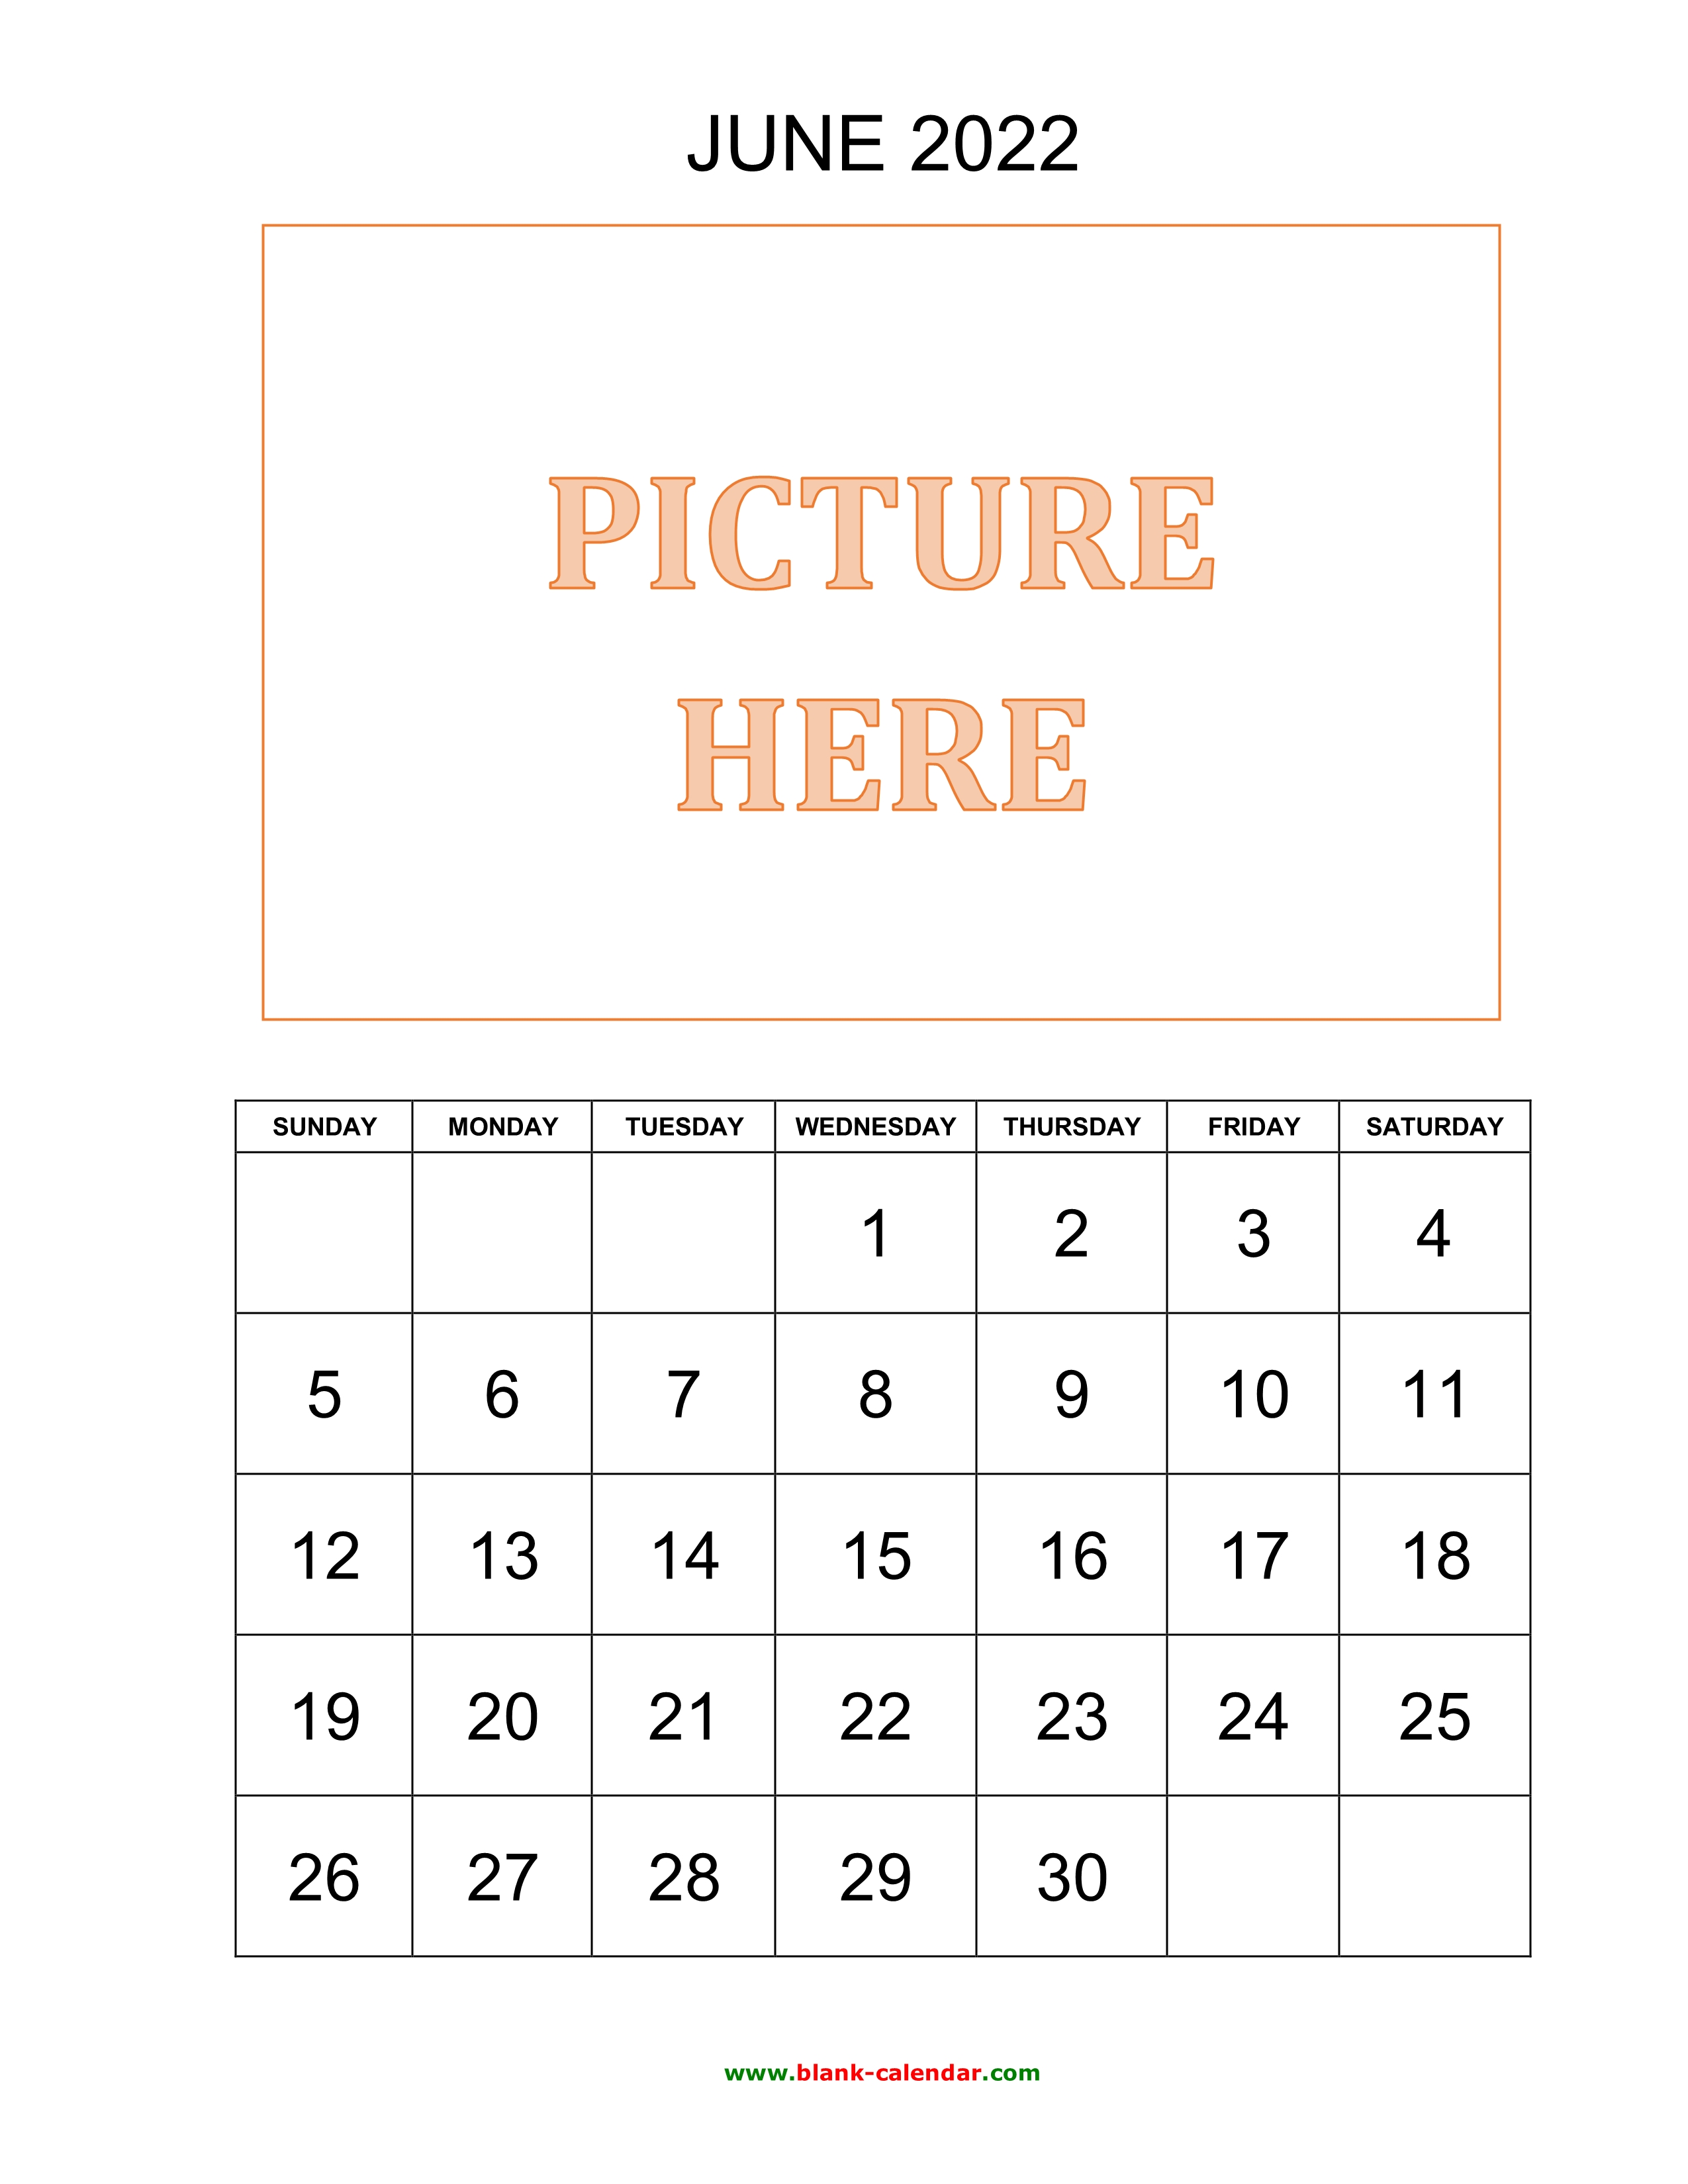 free download printable june 2022 calendar pictures can be placed at